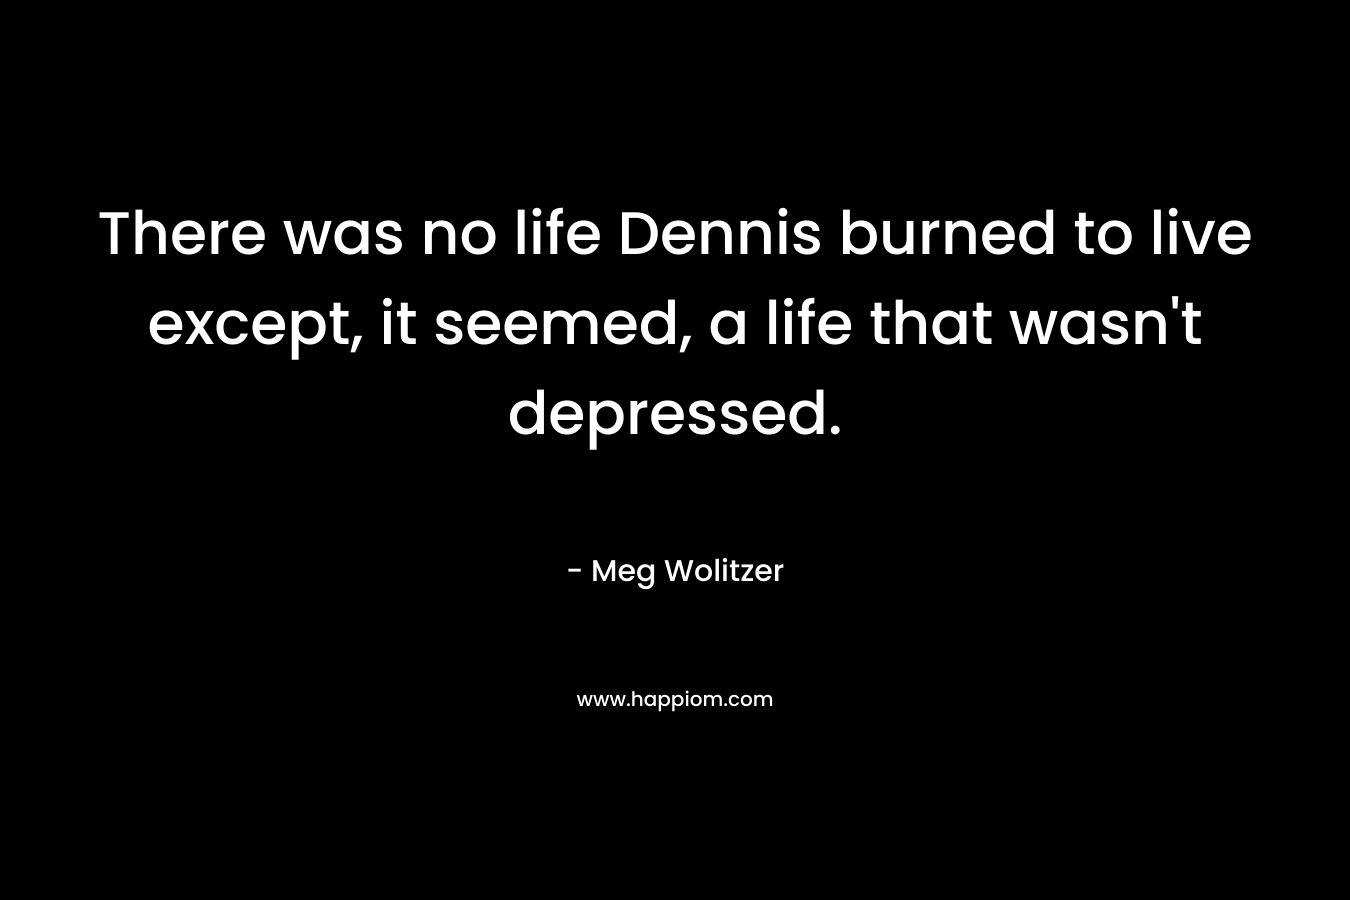 There was no life Dennis burned to live except, it seemed, a life that wasn't depressed.